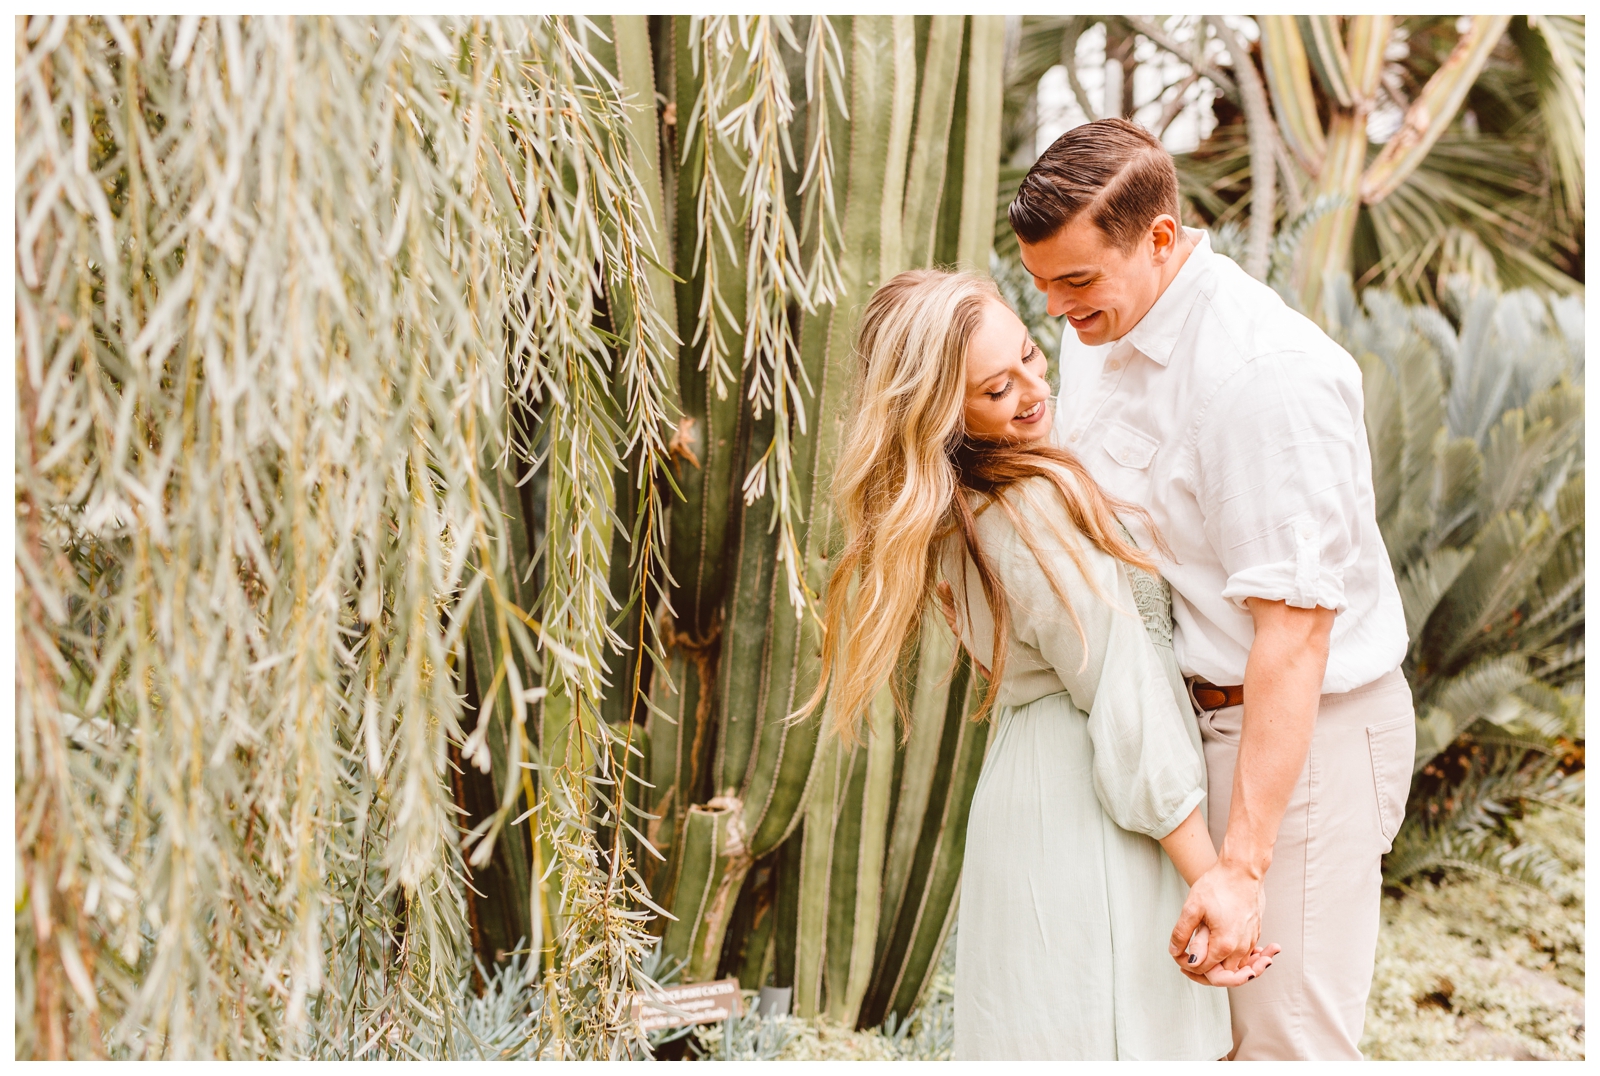 Romantic Greenhouse Engagement Session Inspo - Longwood Gardens, PA - Brooke Michelle Photography